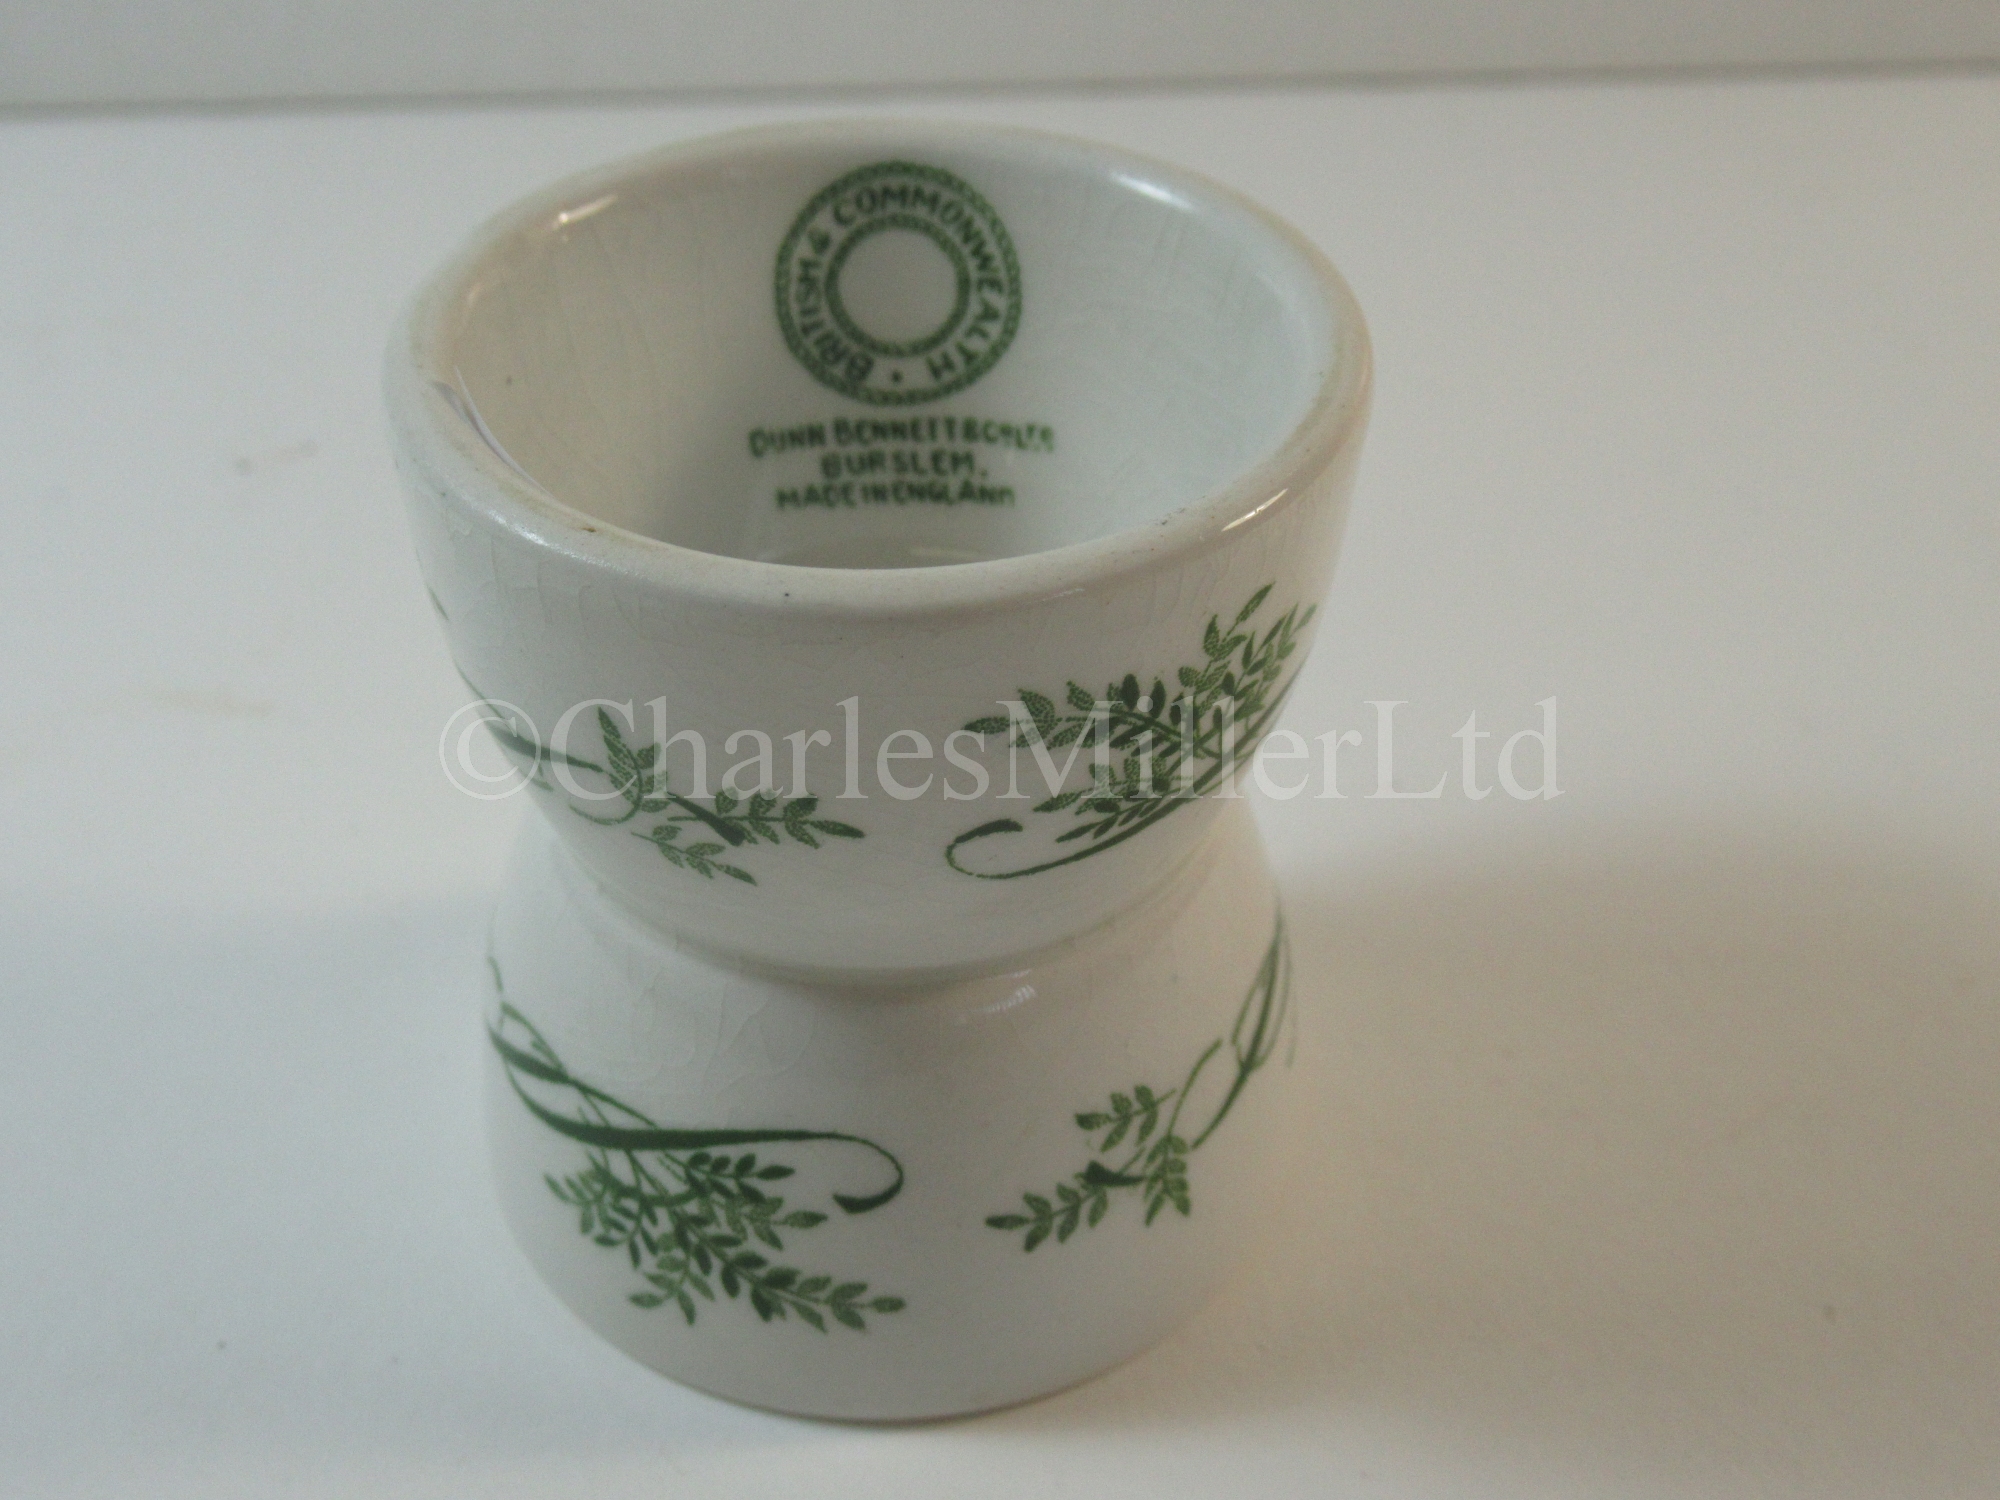 A British & Commonwealth Line egg cup